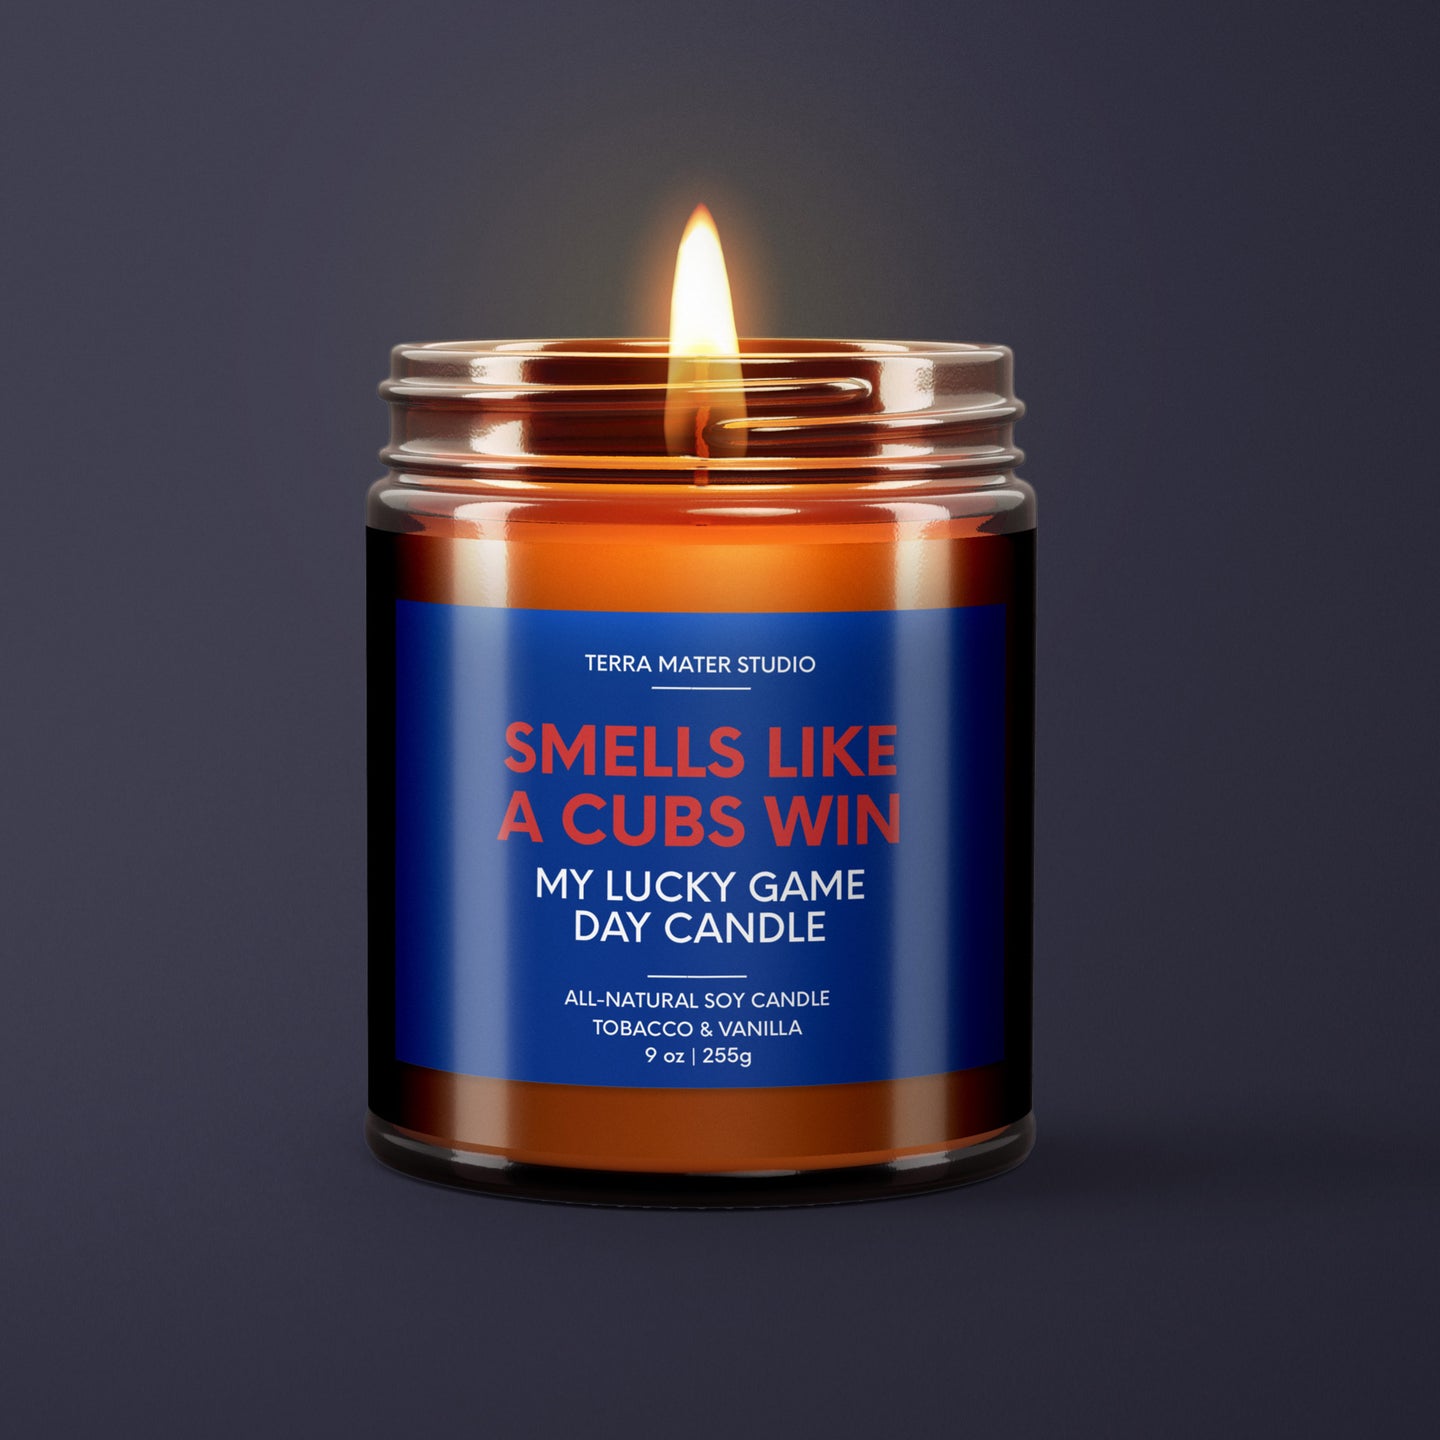 Smells Like A Cubs Win | Chicago Lucky Game Day Candle | Soy Wax Candle